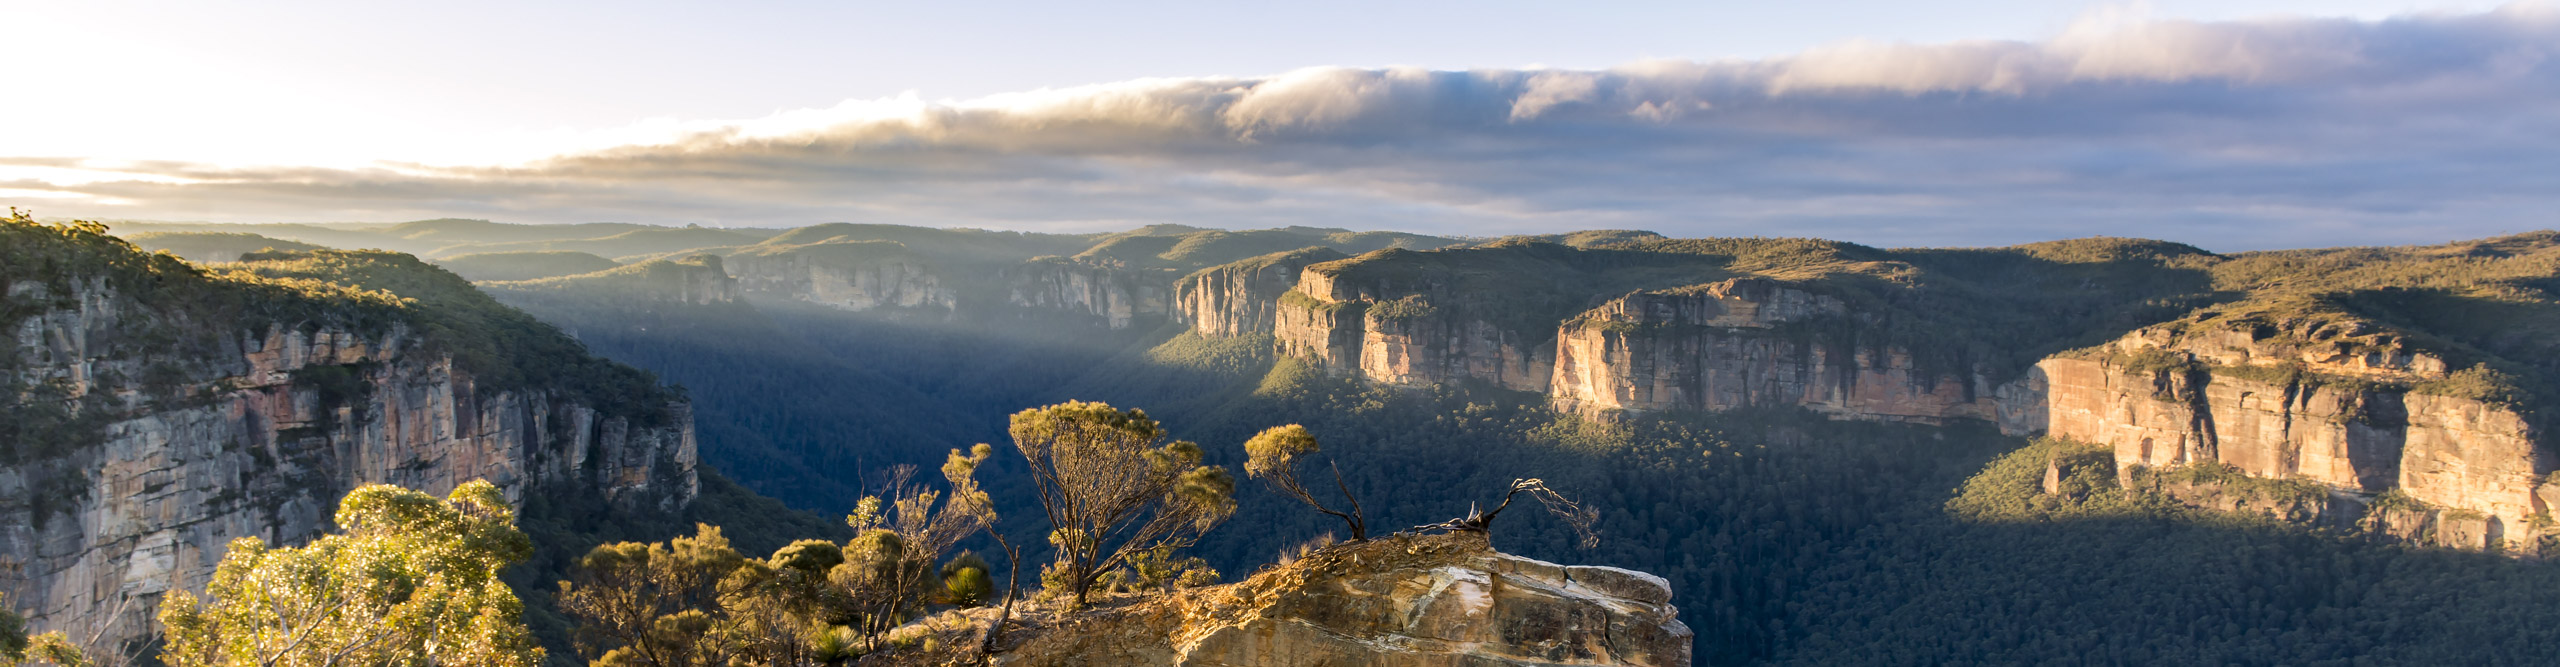 Sunrise over the Blue Mountains on a misty day, New South Wales, Australia 